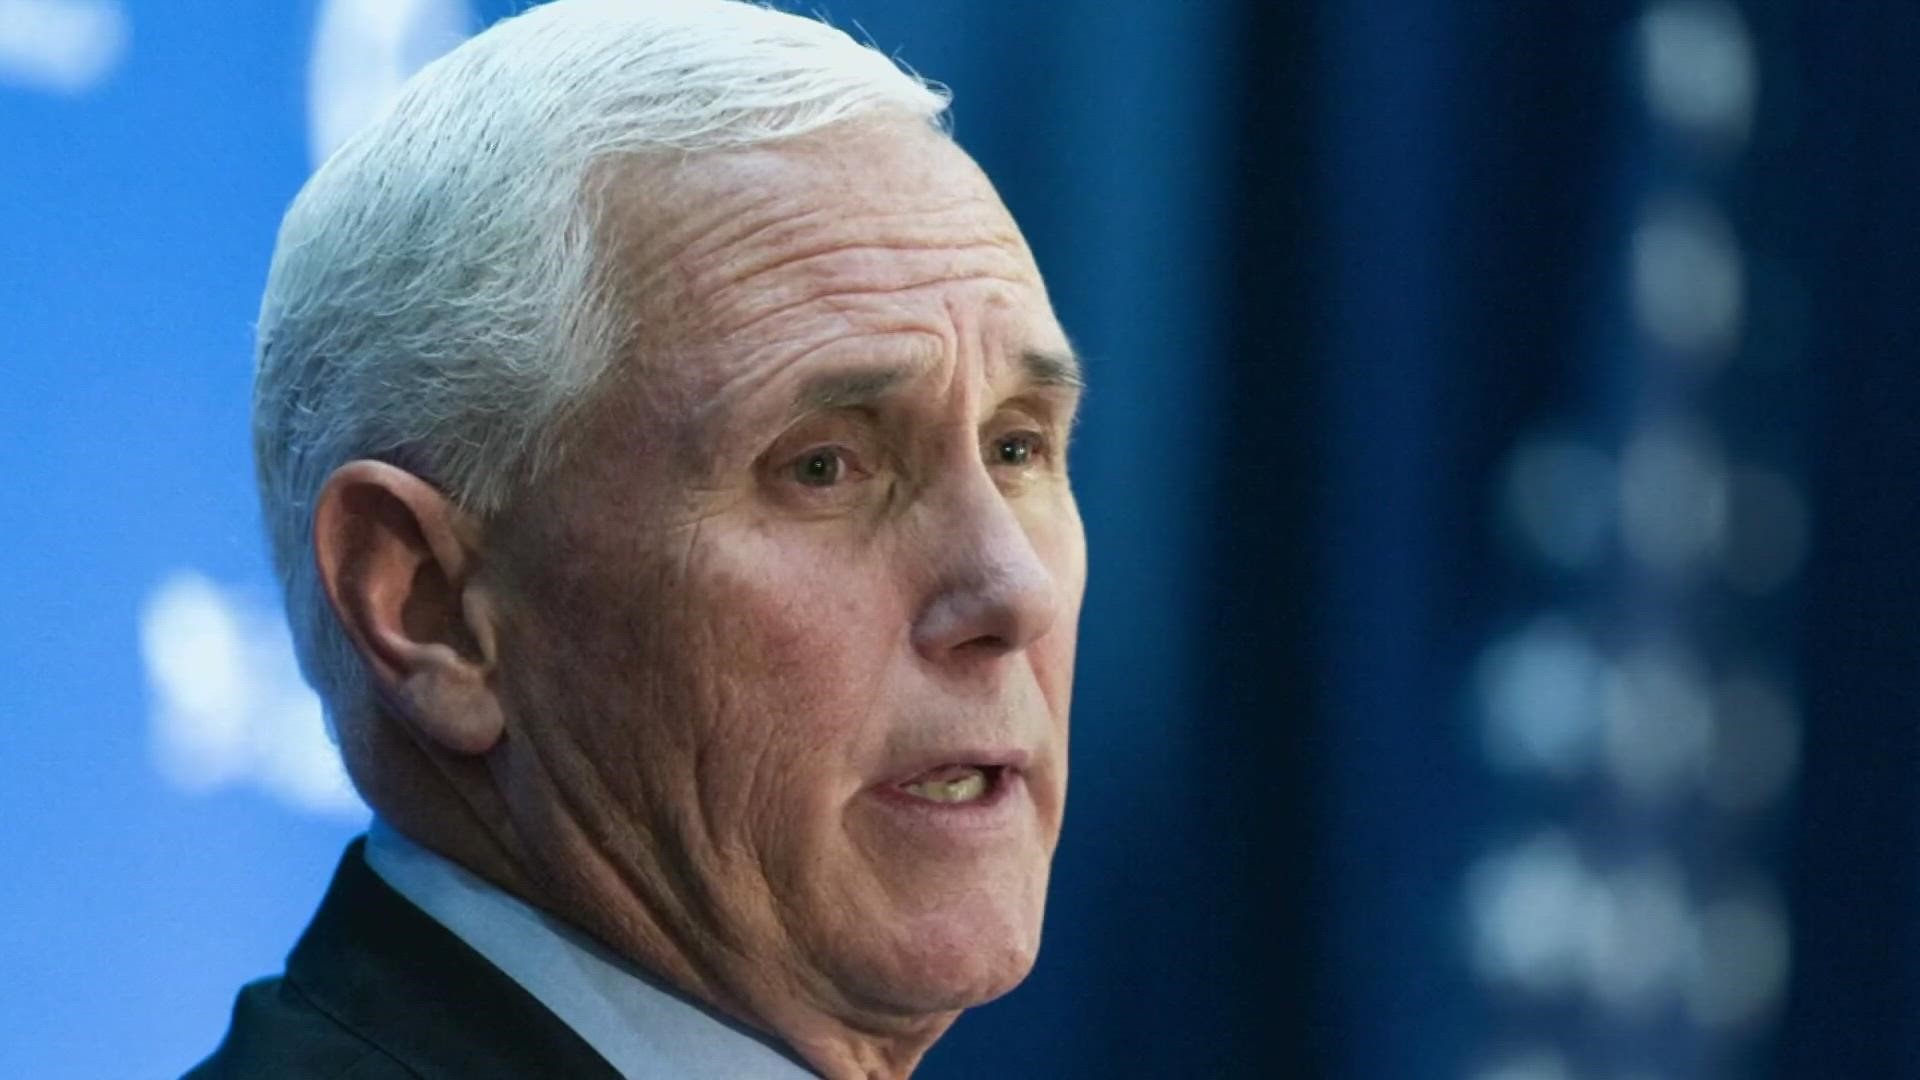 Former Vice President Mike Pence was not home at the time but a member of his legal team was on site.